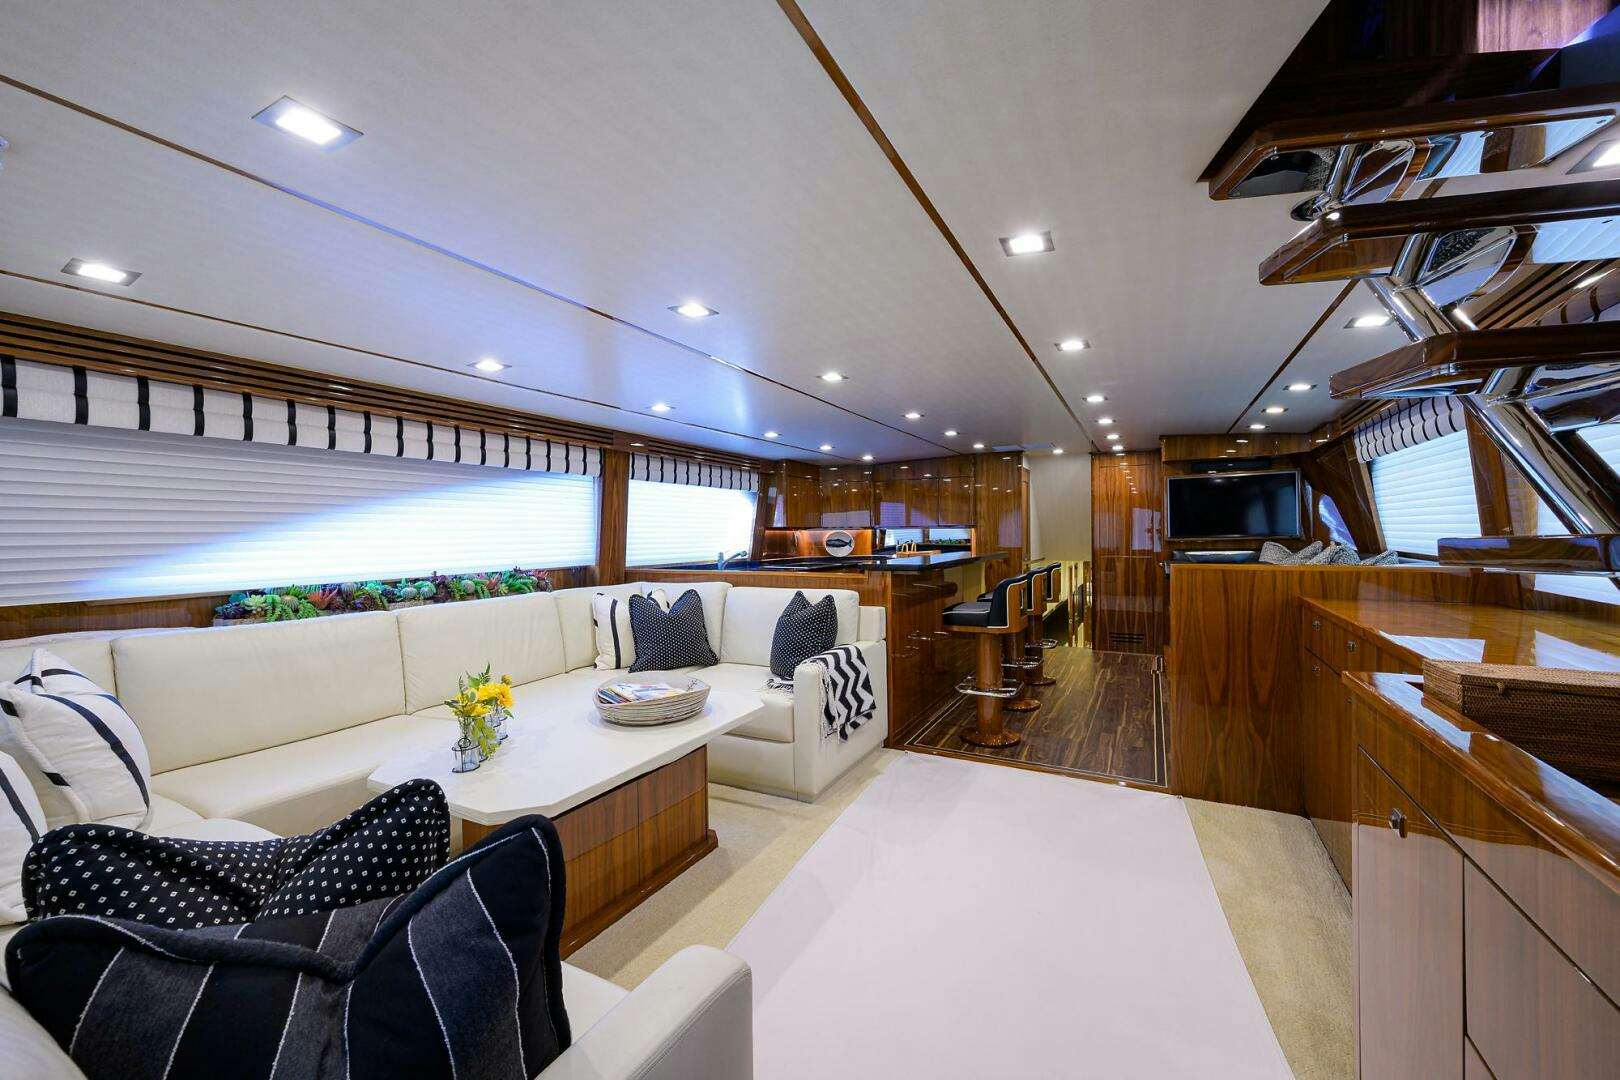 80' viking
Yacht for Sale